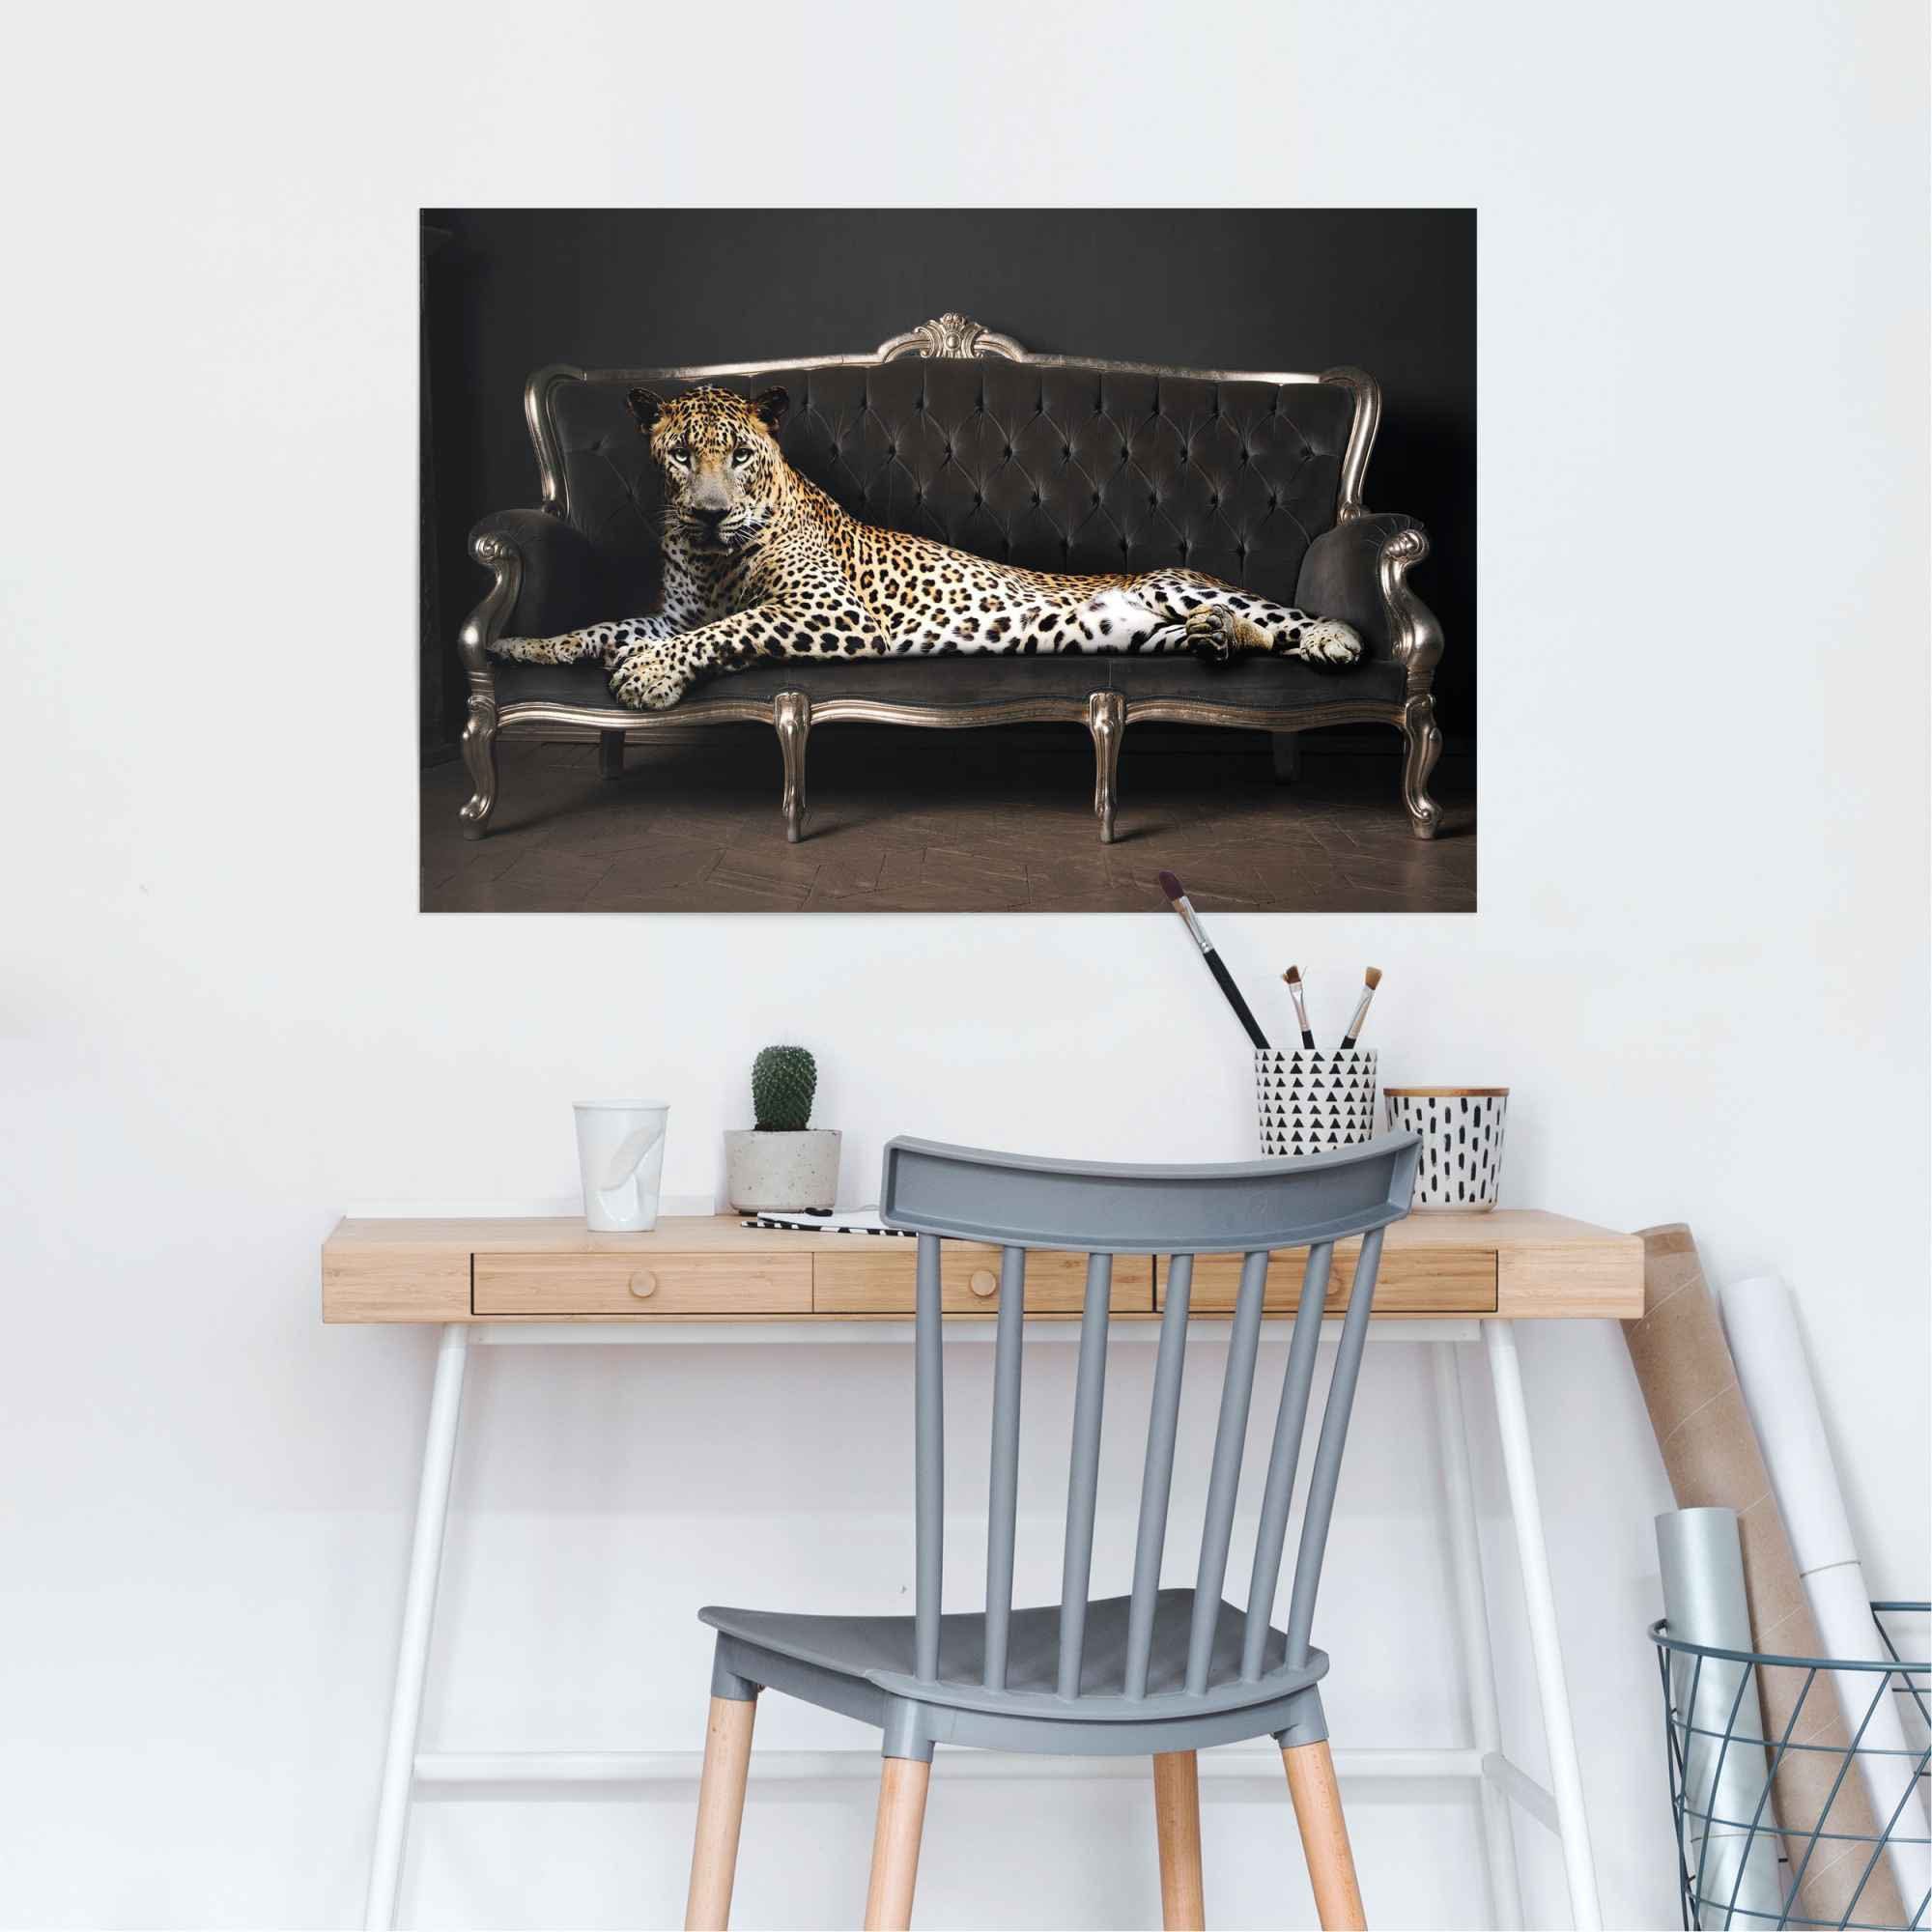 Panther Leopard - Liegend Relax, Reinders! Chic (1 - Luxus St) Poster -